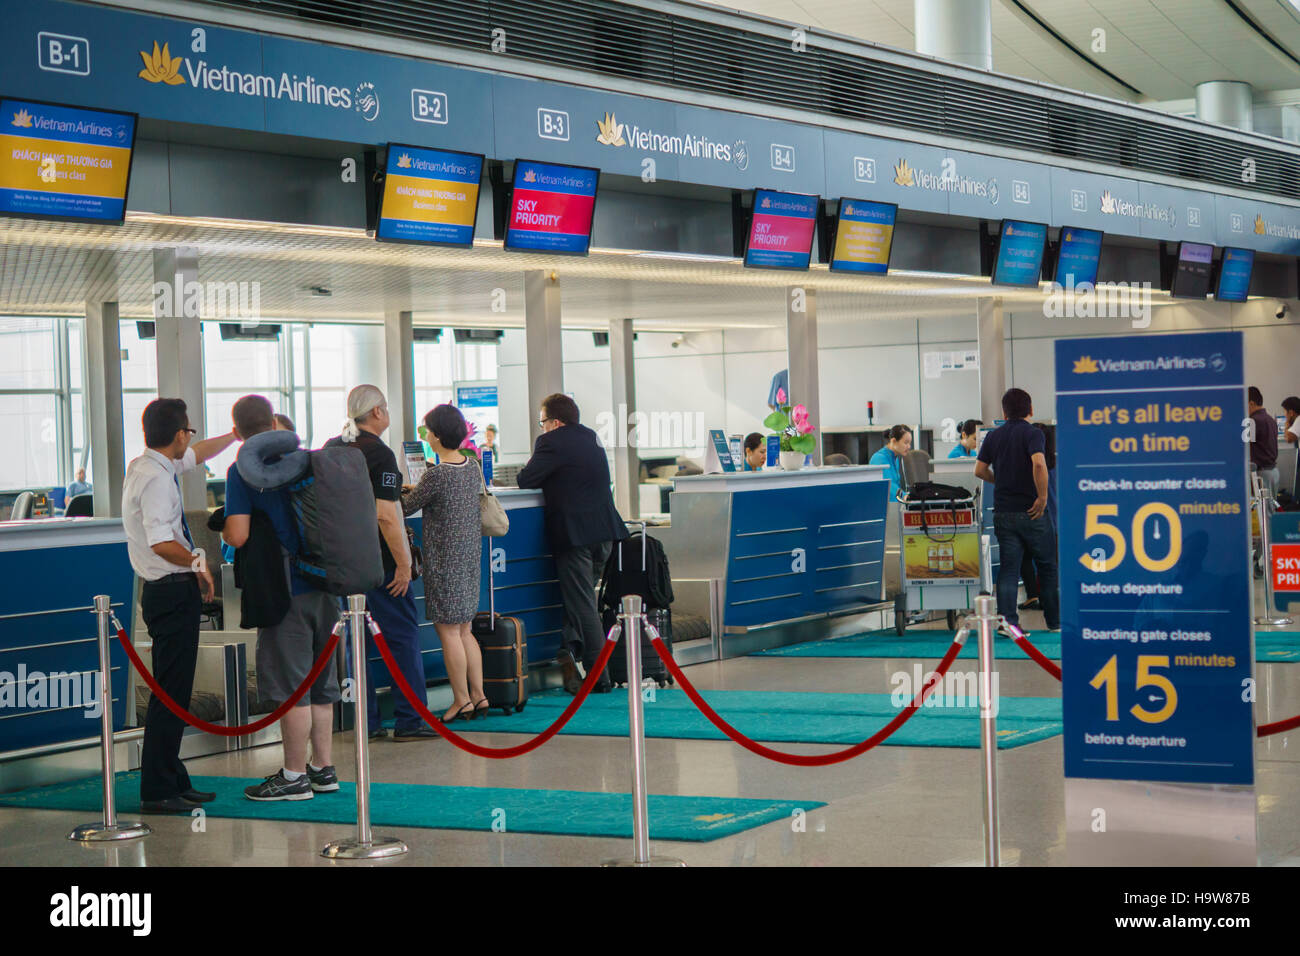 Ho Chi Minh City, Vietnam :Vietnam Airlines check-in counter area inside Tan Son Nhat International Airport, Ho Chi Minh, Saigon Stock Photo